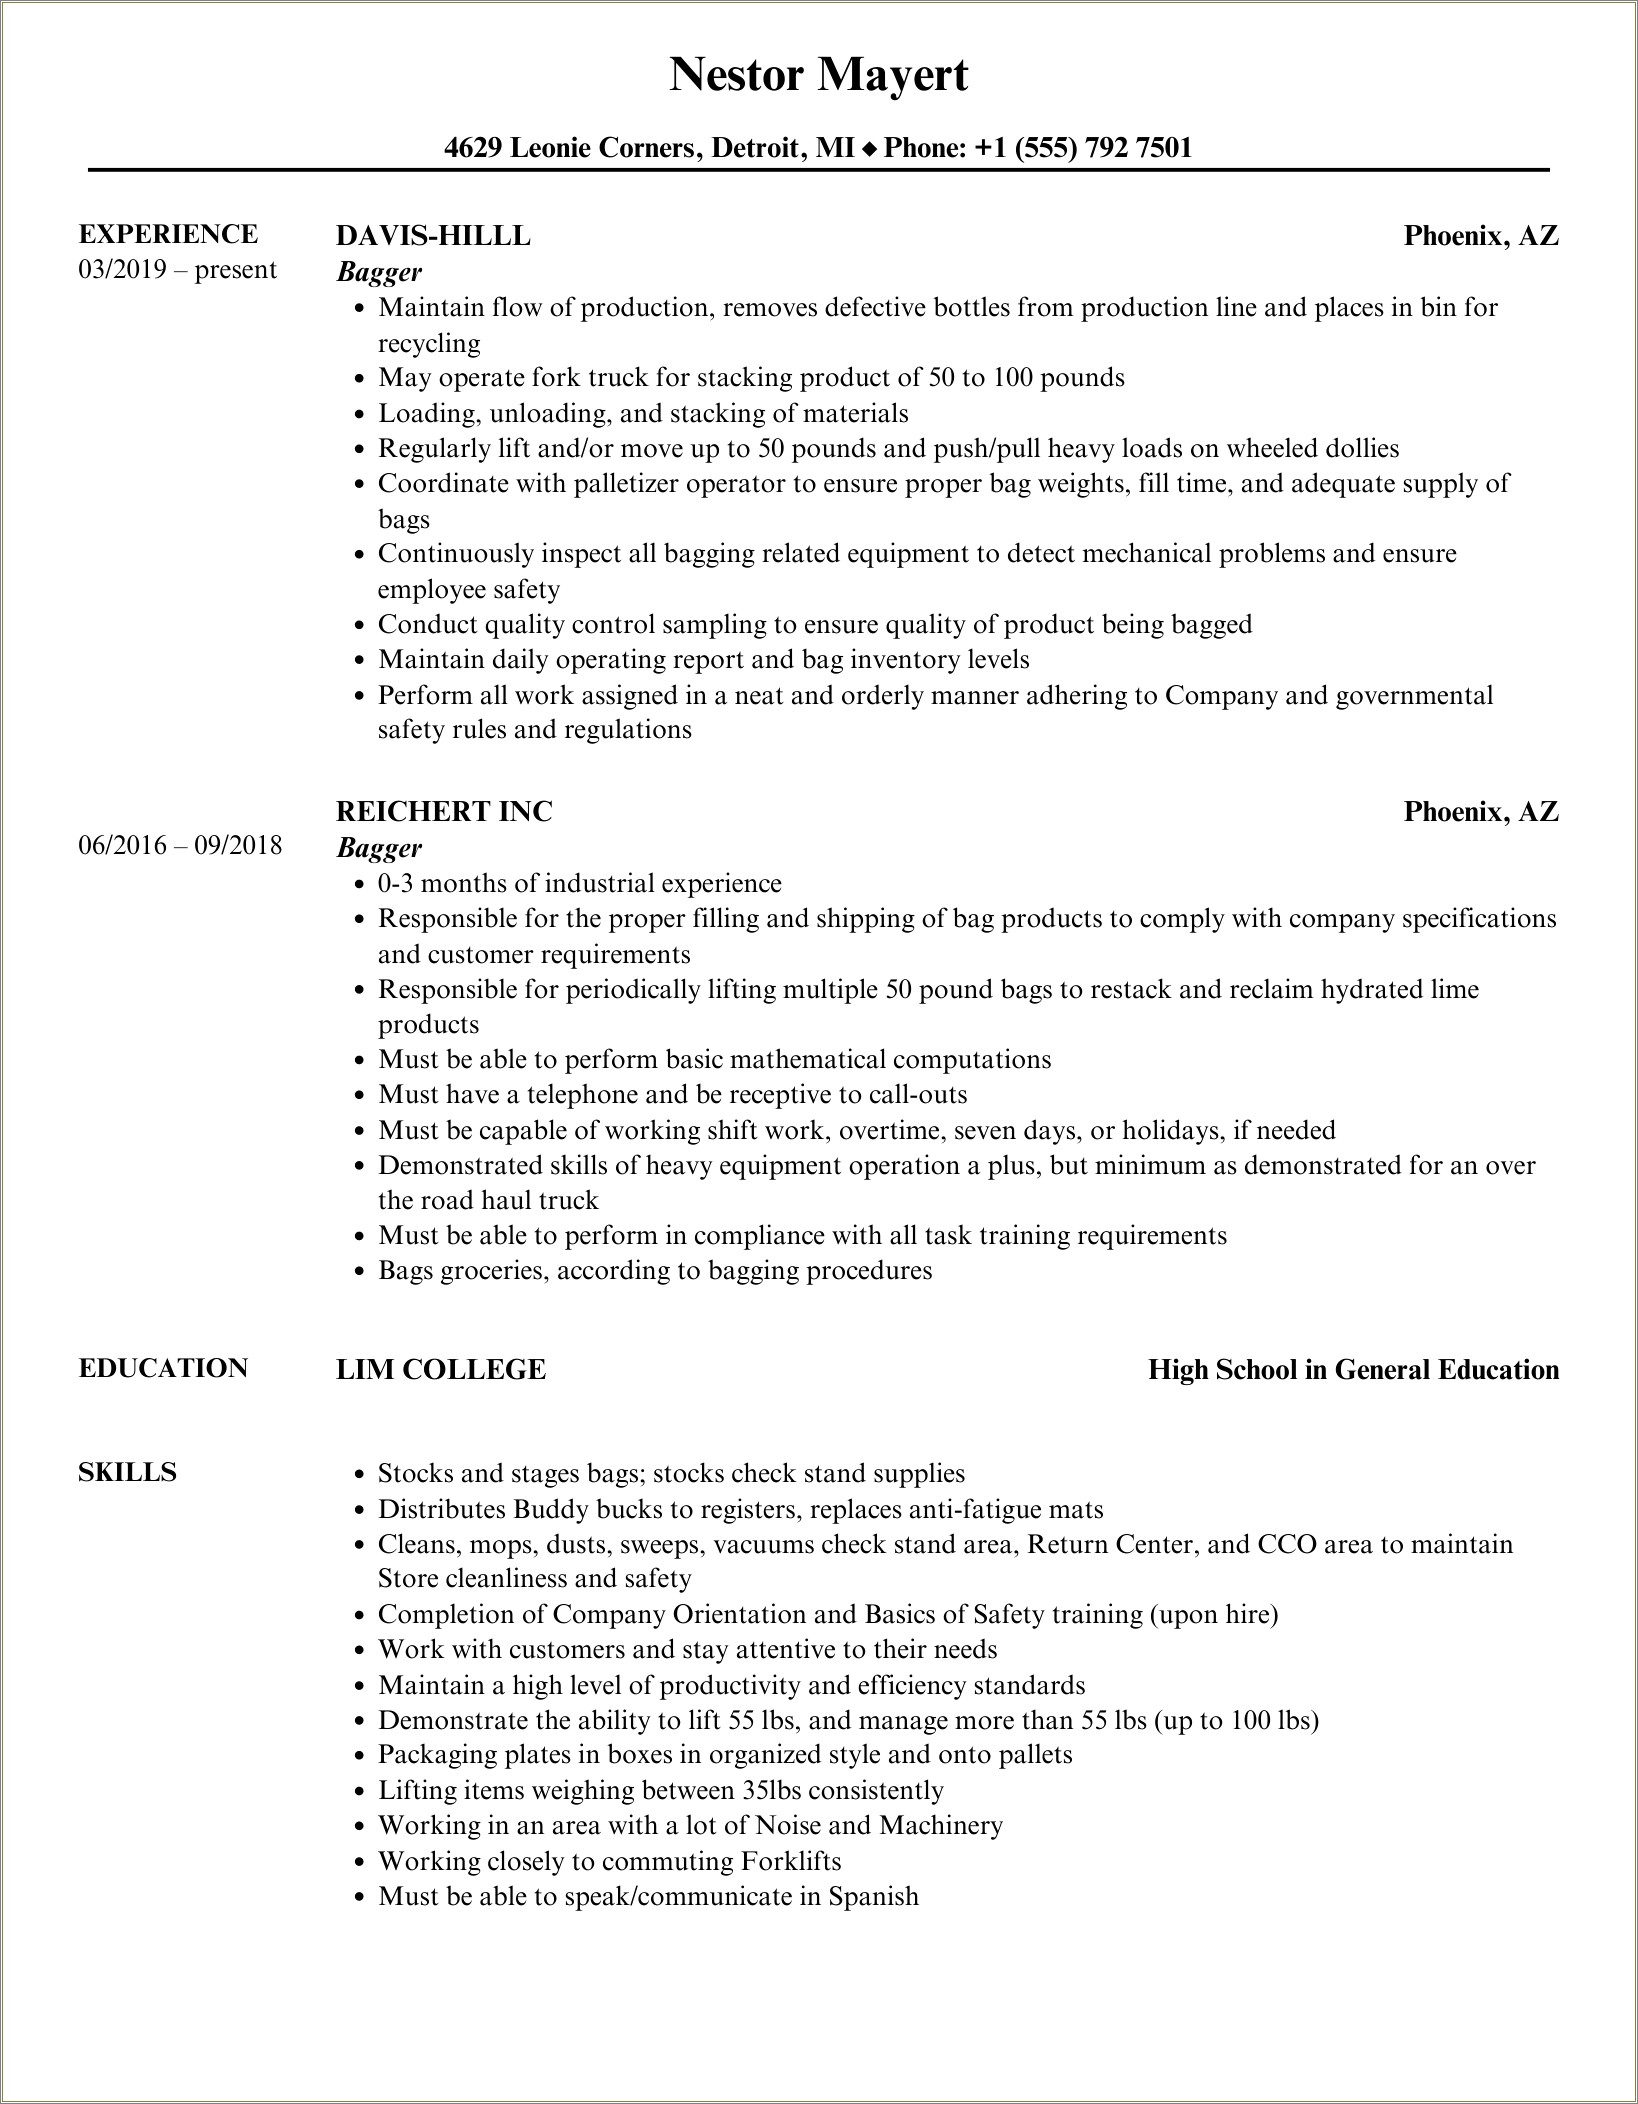 A Good Resume Summary For A Bagger